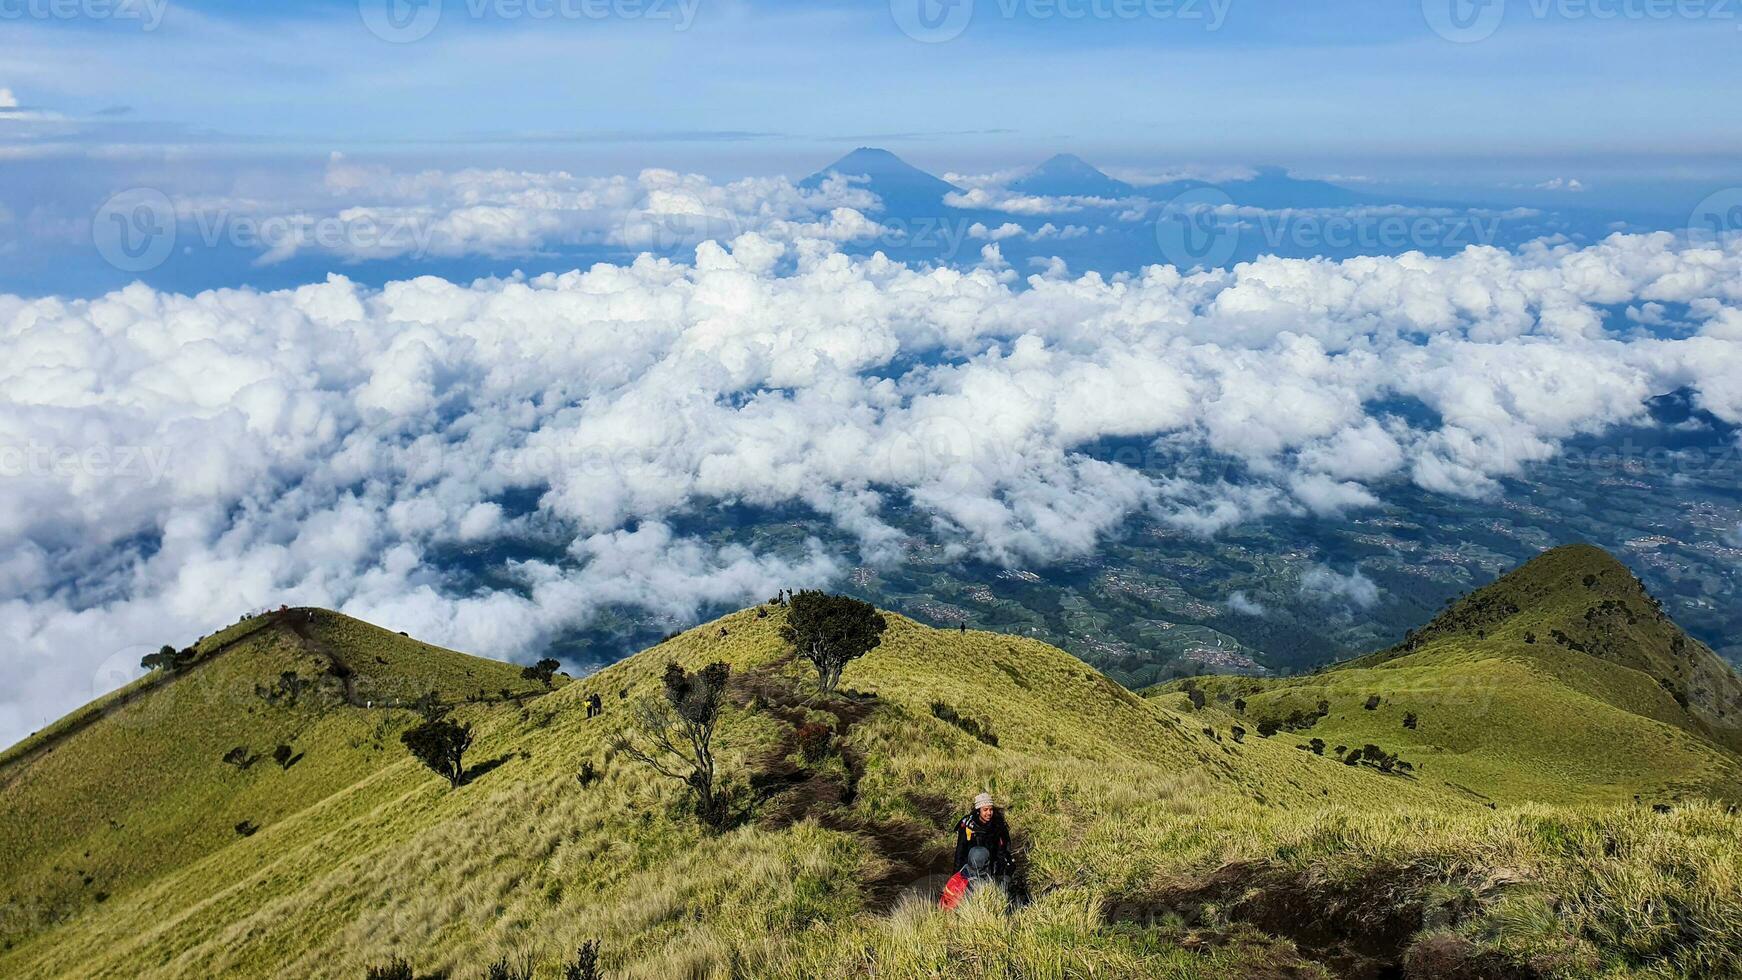 The wide and beautiful expanse of the Mount Merbabu valley photo